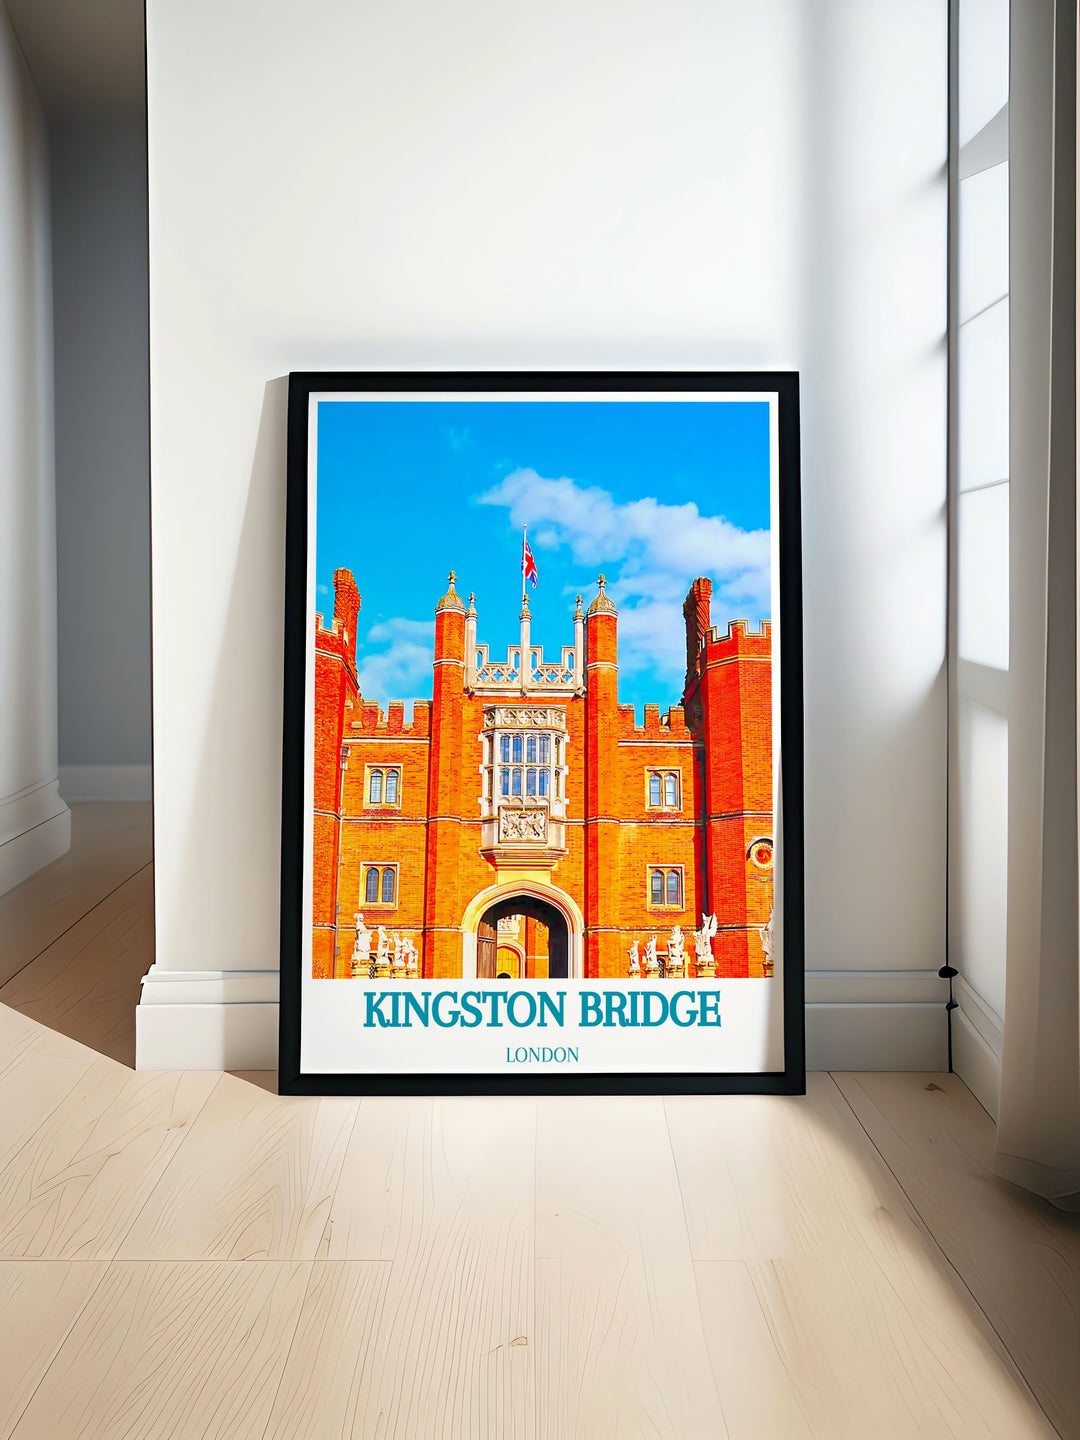 This travel poster captures the historical significance of Kingston Bridge and Hampton Court Palace in London, showcasing their architectural elegance and timeless charm.